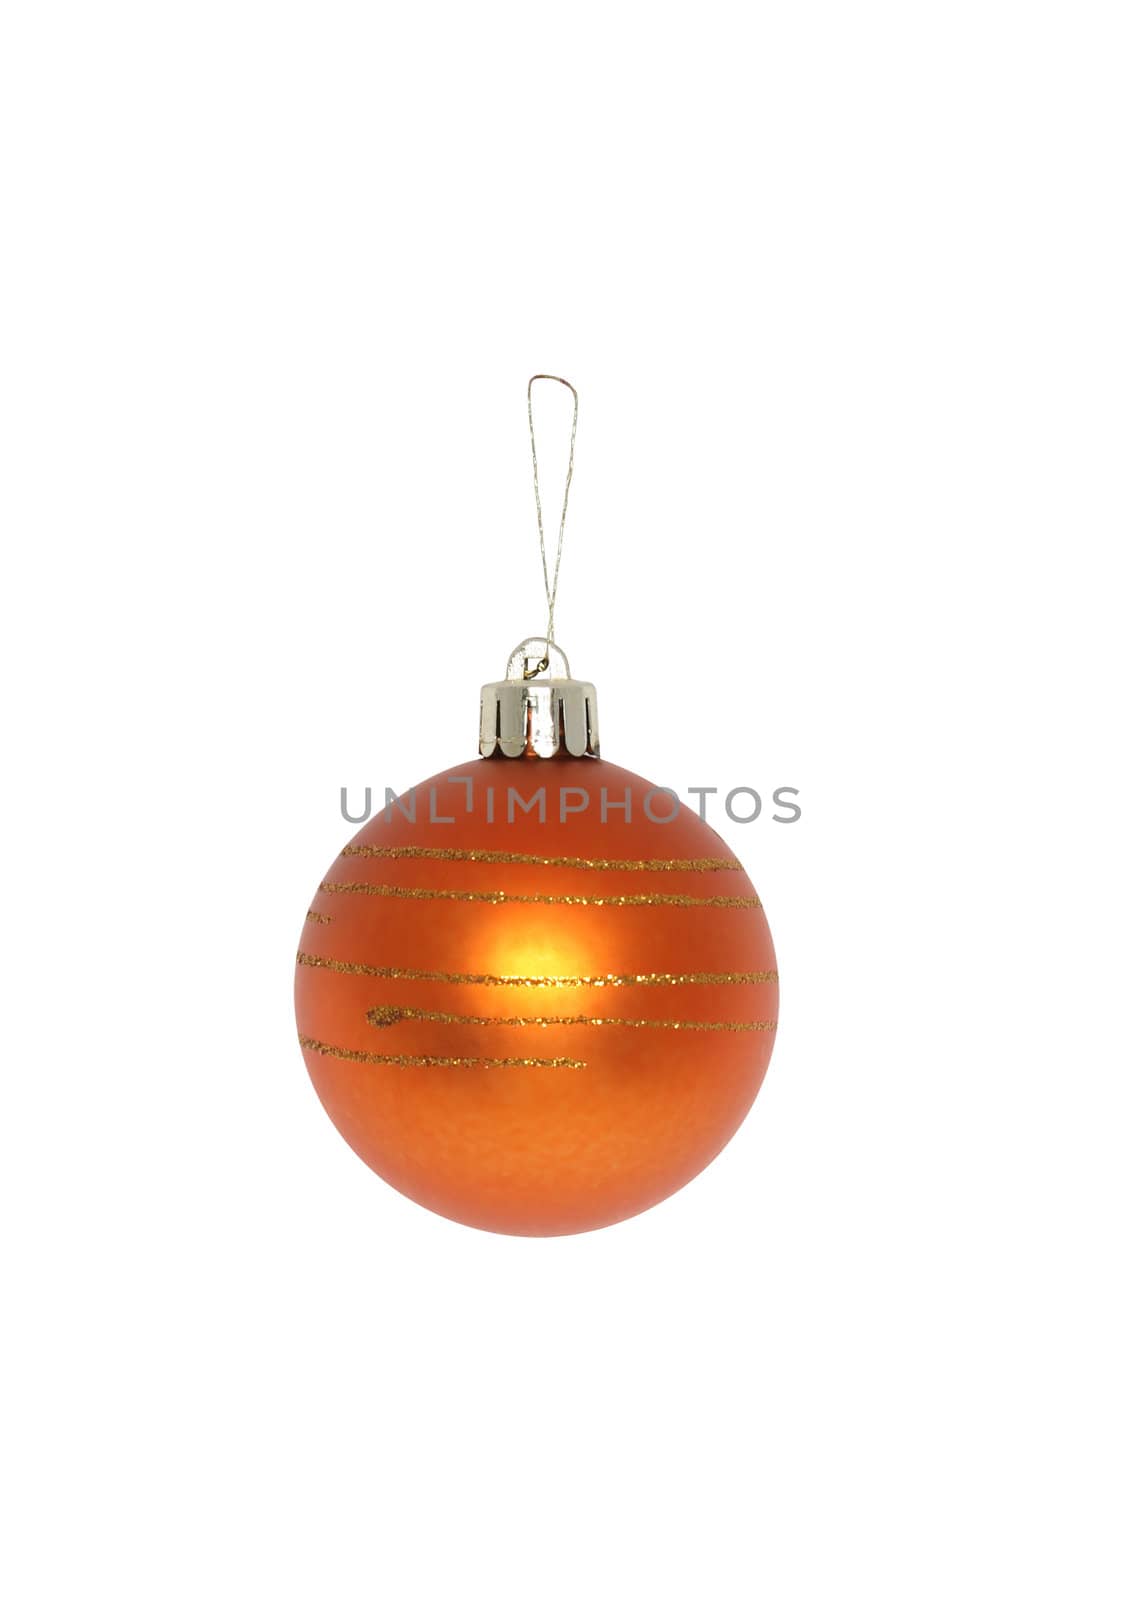 One ginger Christmas ball hanging on white background. Object with clipping path